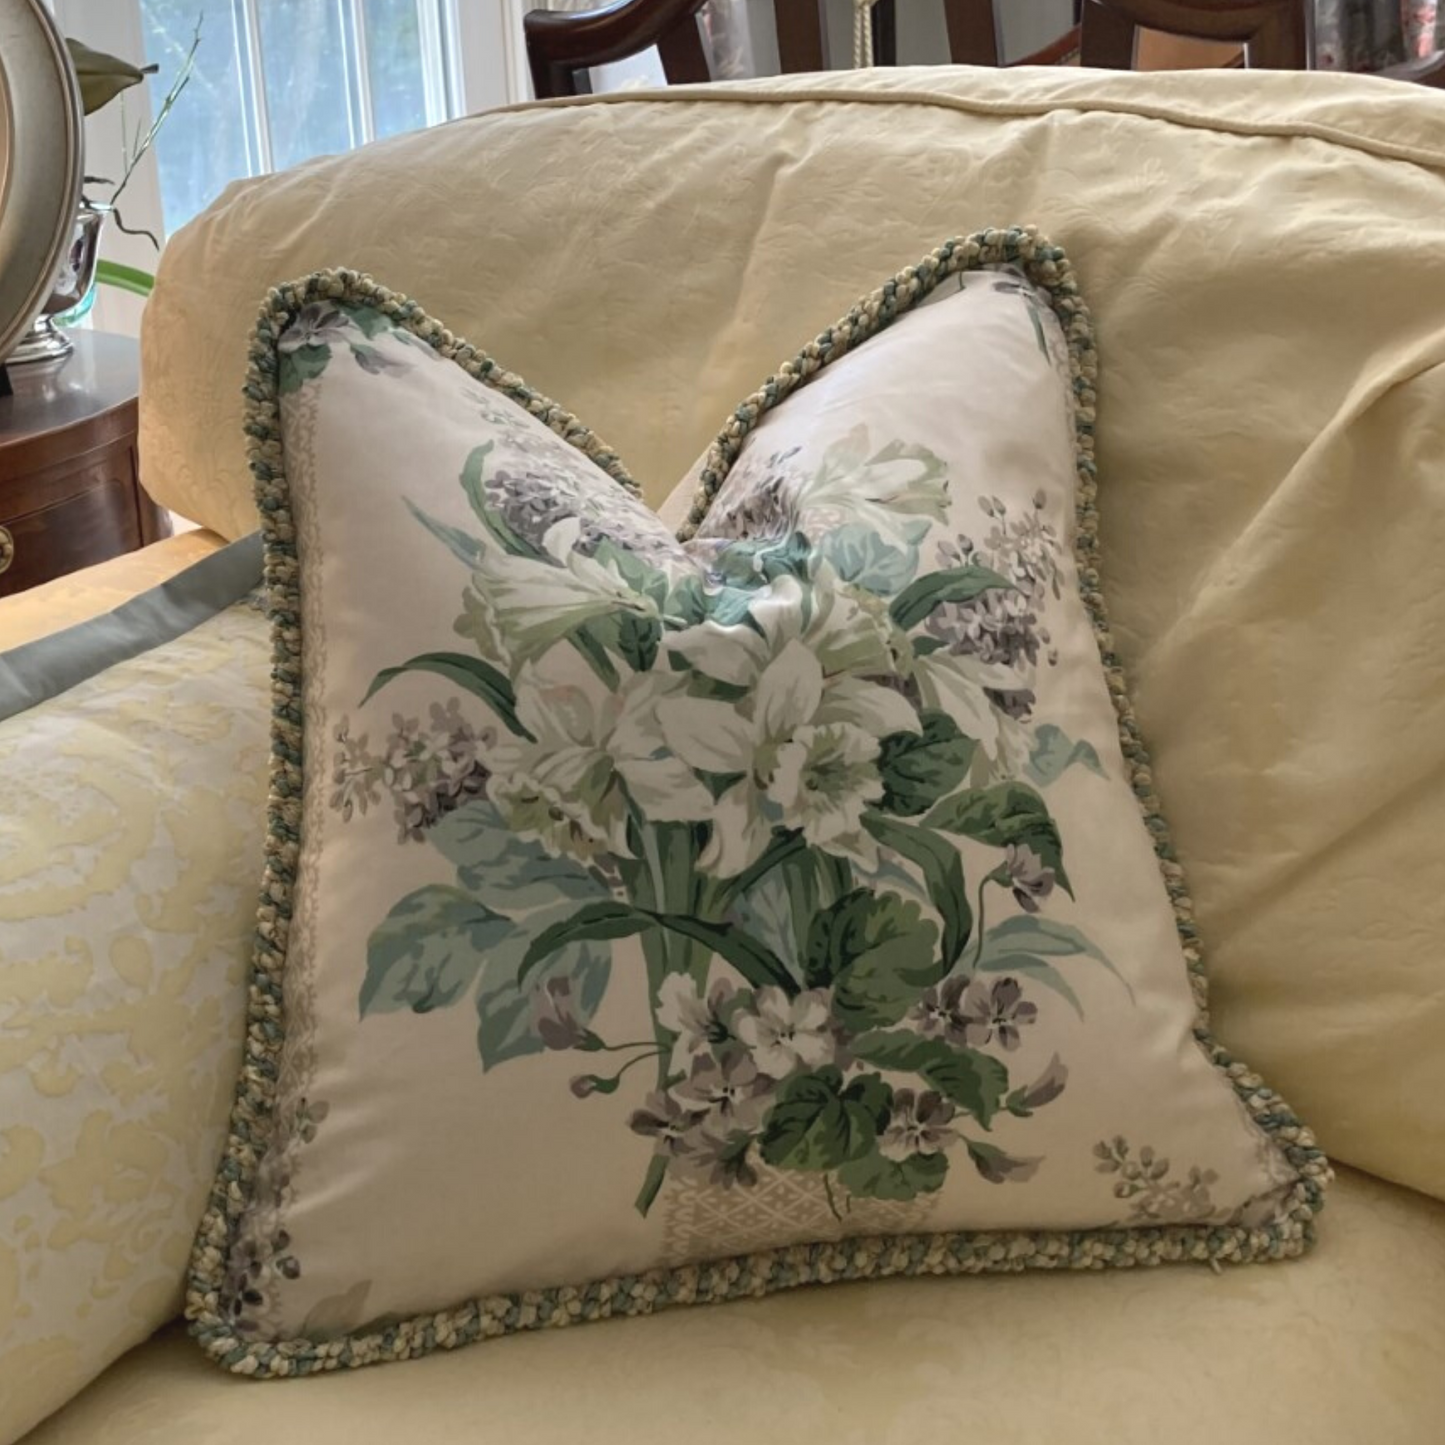 Wildflower Stripe by Jean Monro 16 x 16 Square Decorative Pillow with Down Feather Insert